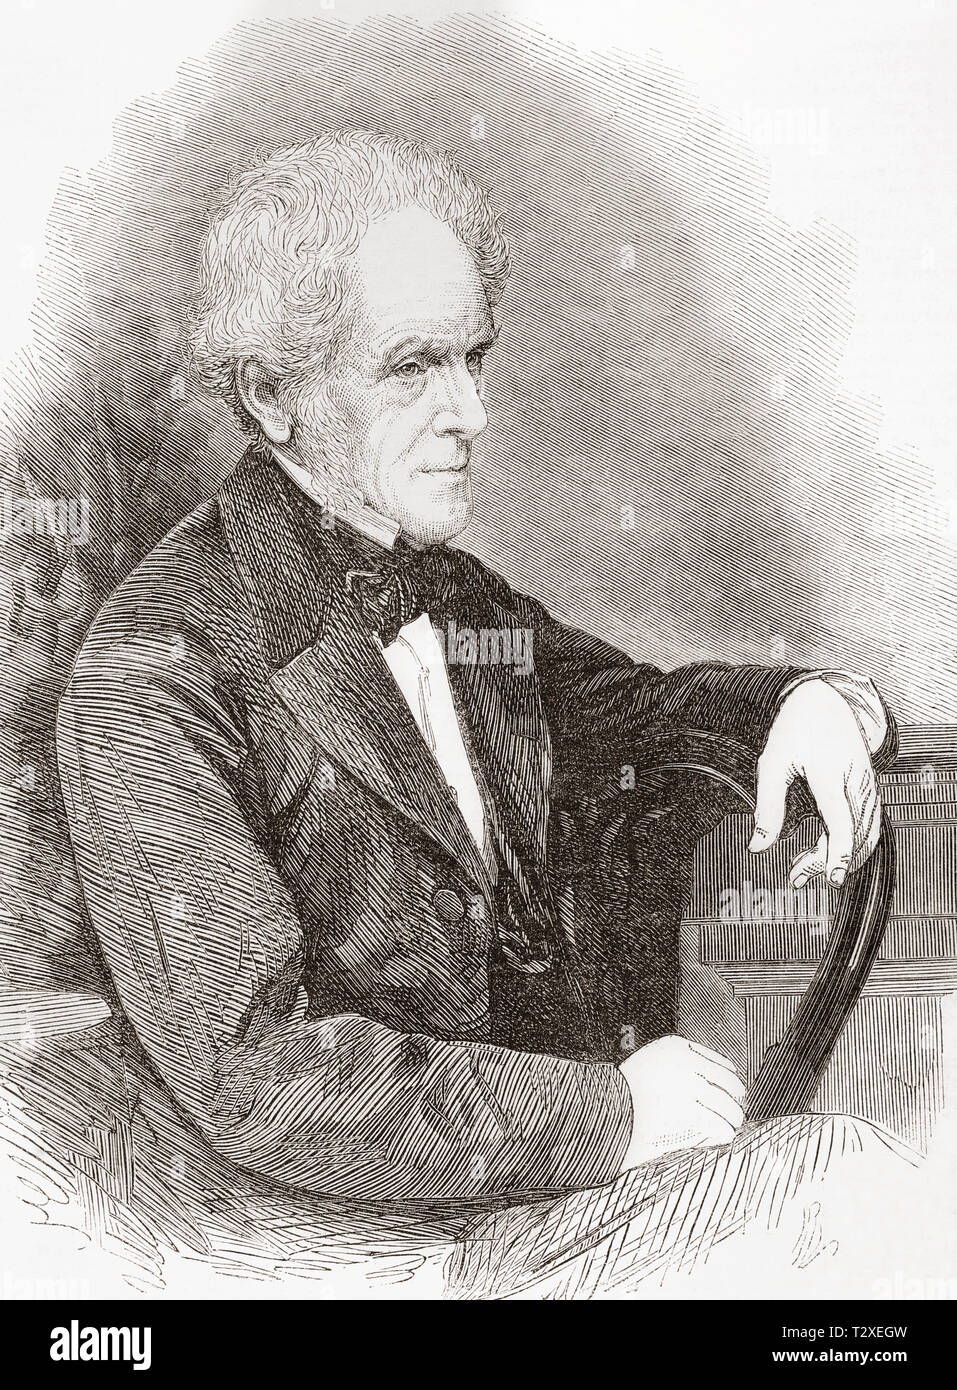 Isaac Taylor, 1787 – 1865. English philosophical and historical writer, artist, and inventor.  From The Illustrated London News, published 1865. Stock Photo